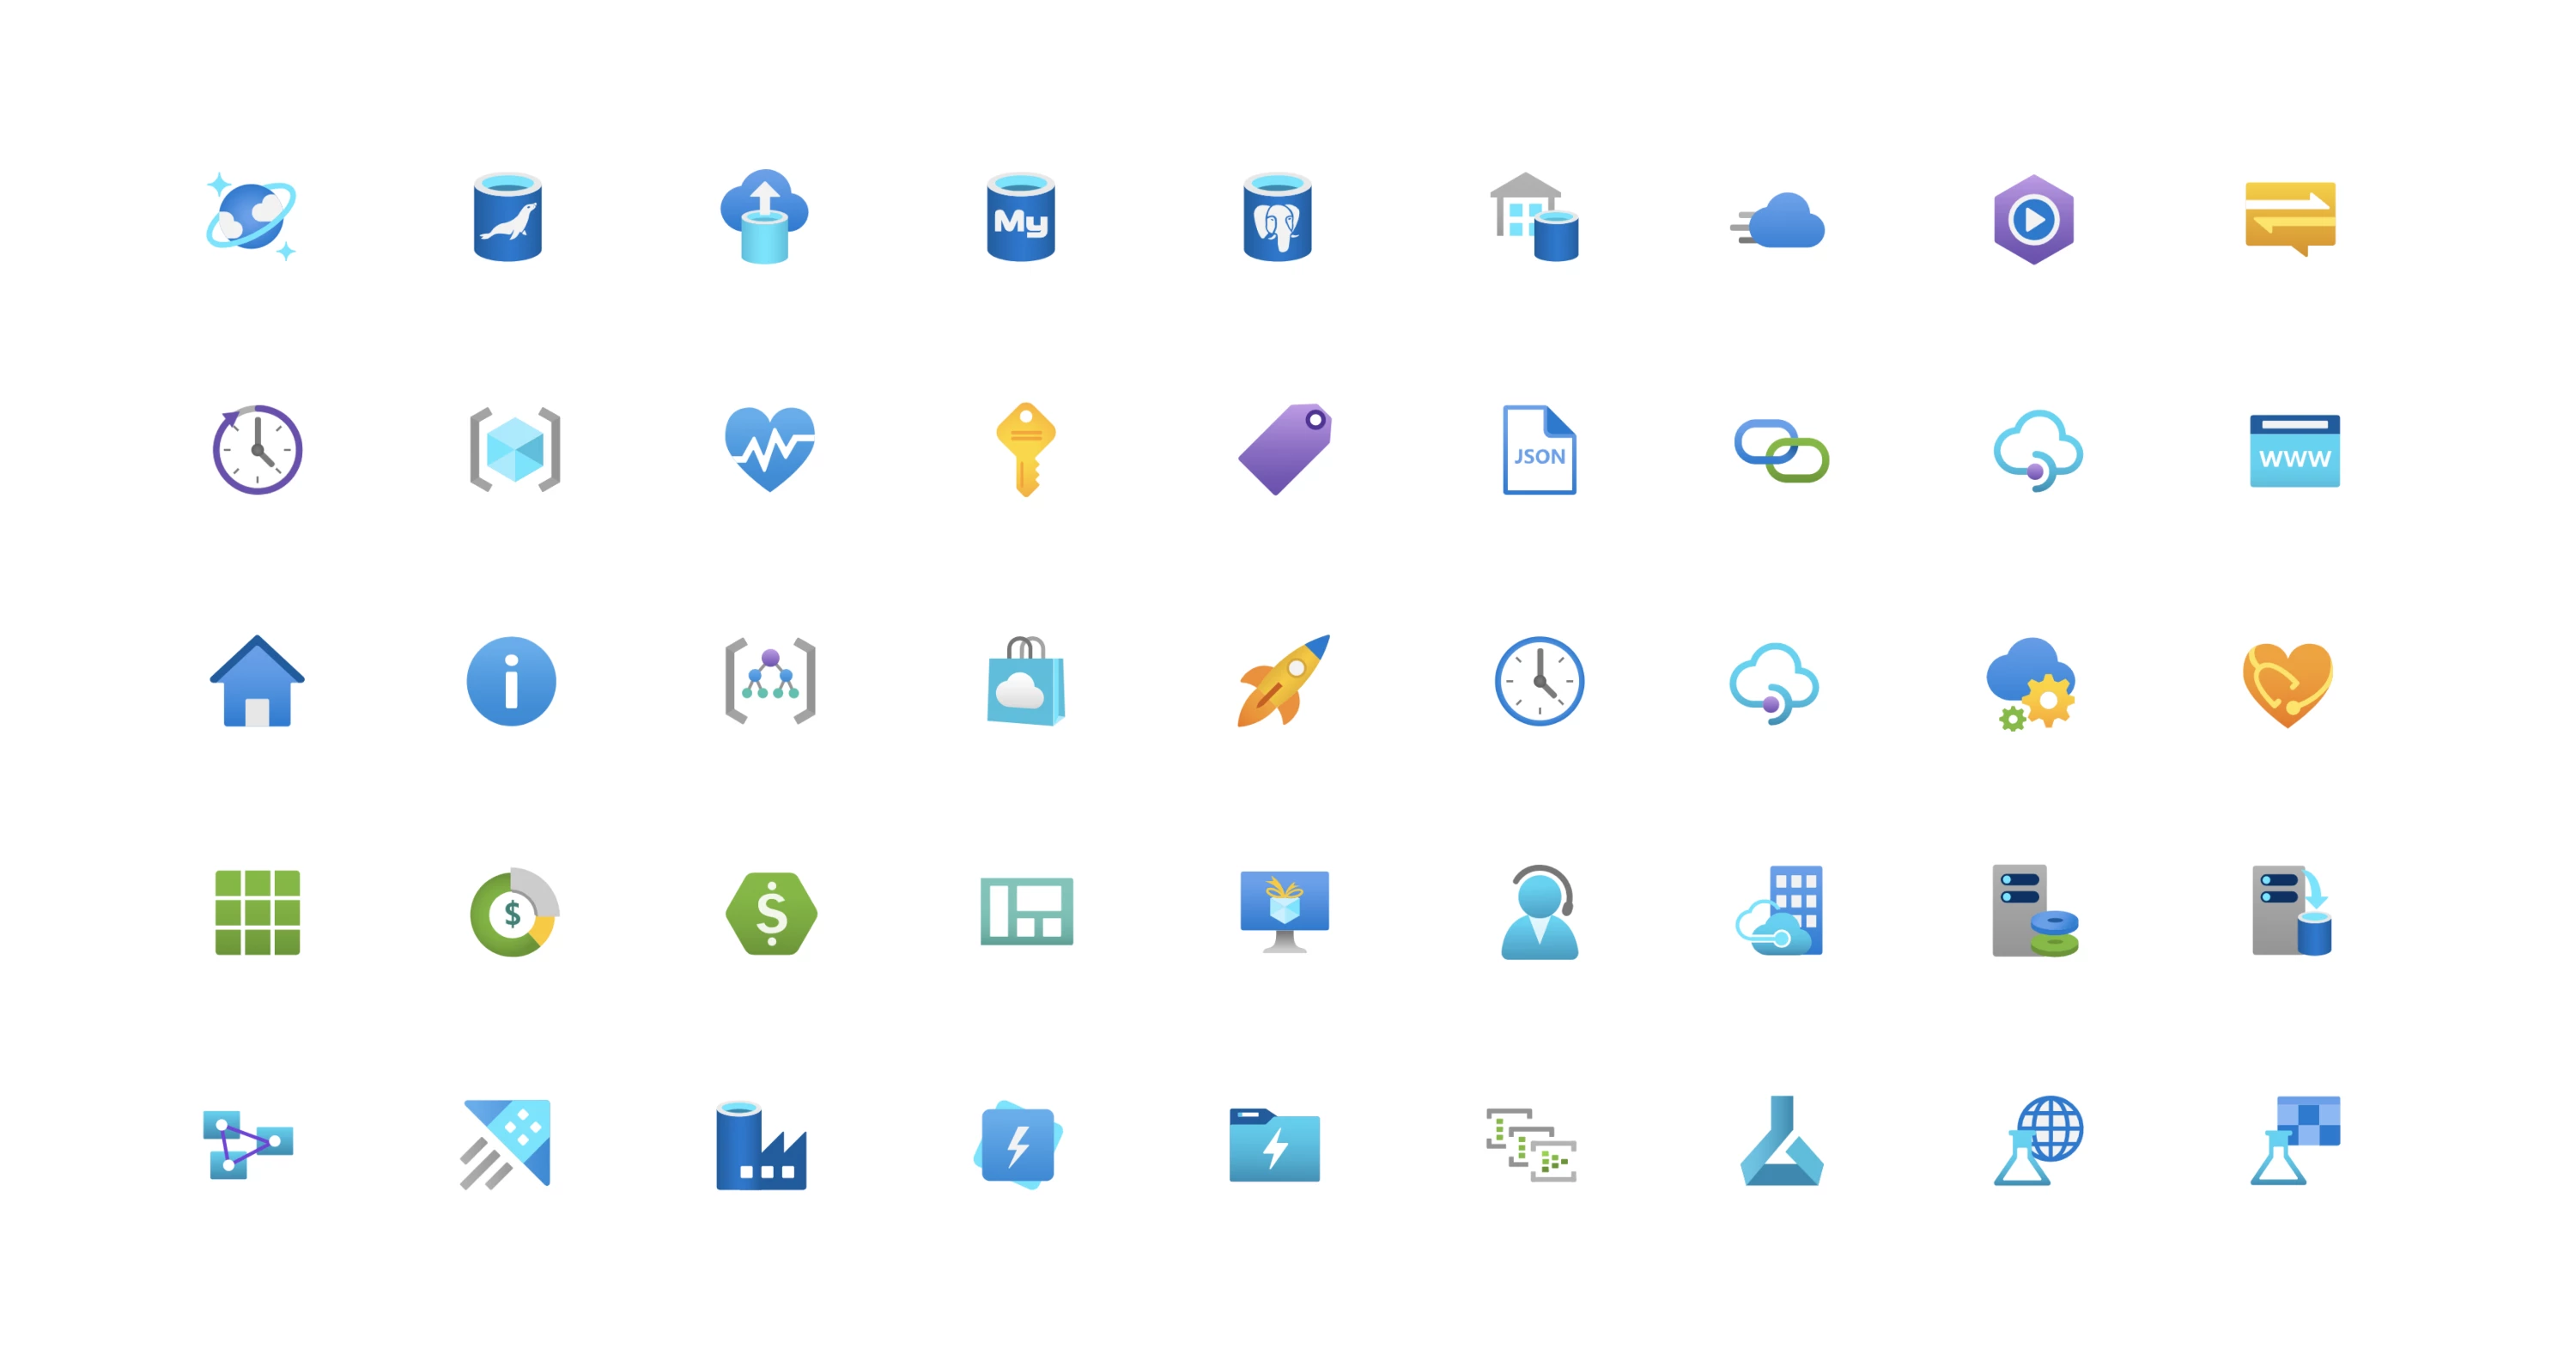 An image showing all of the improved icons for the Azure portal.